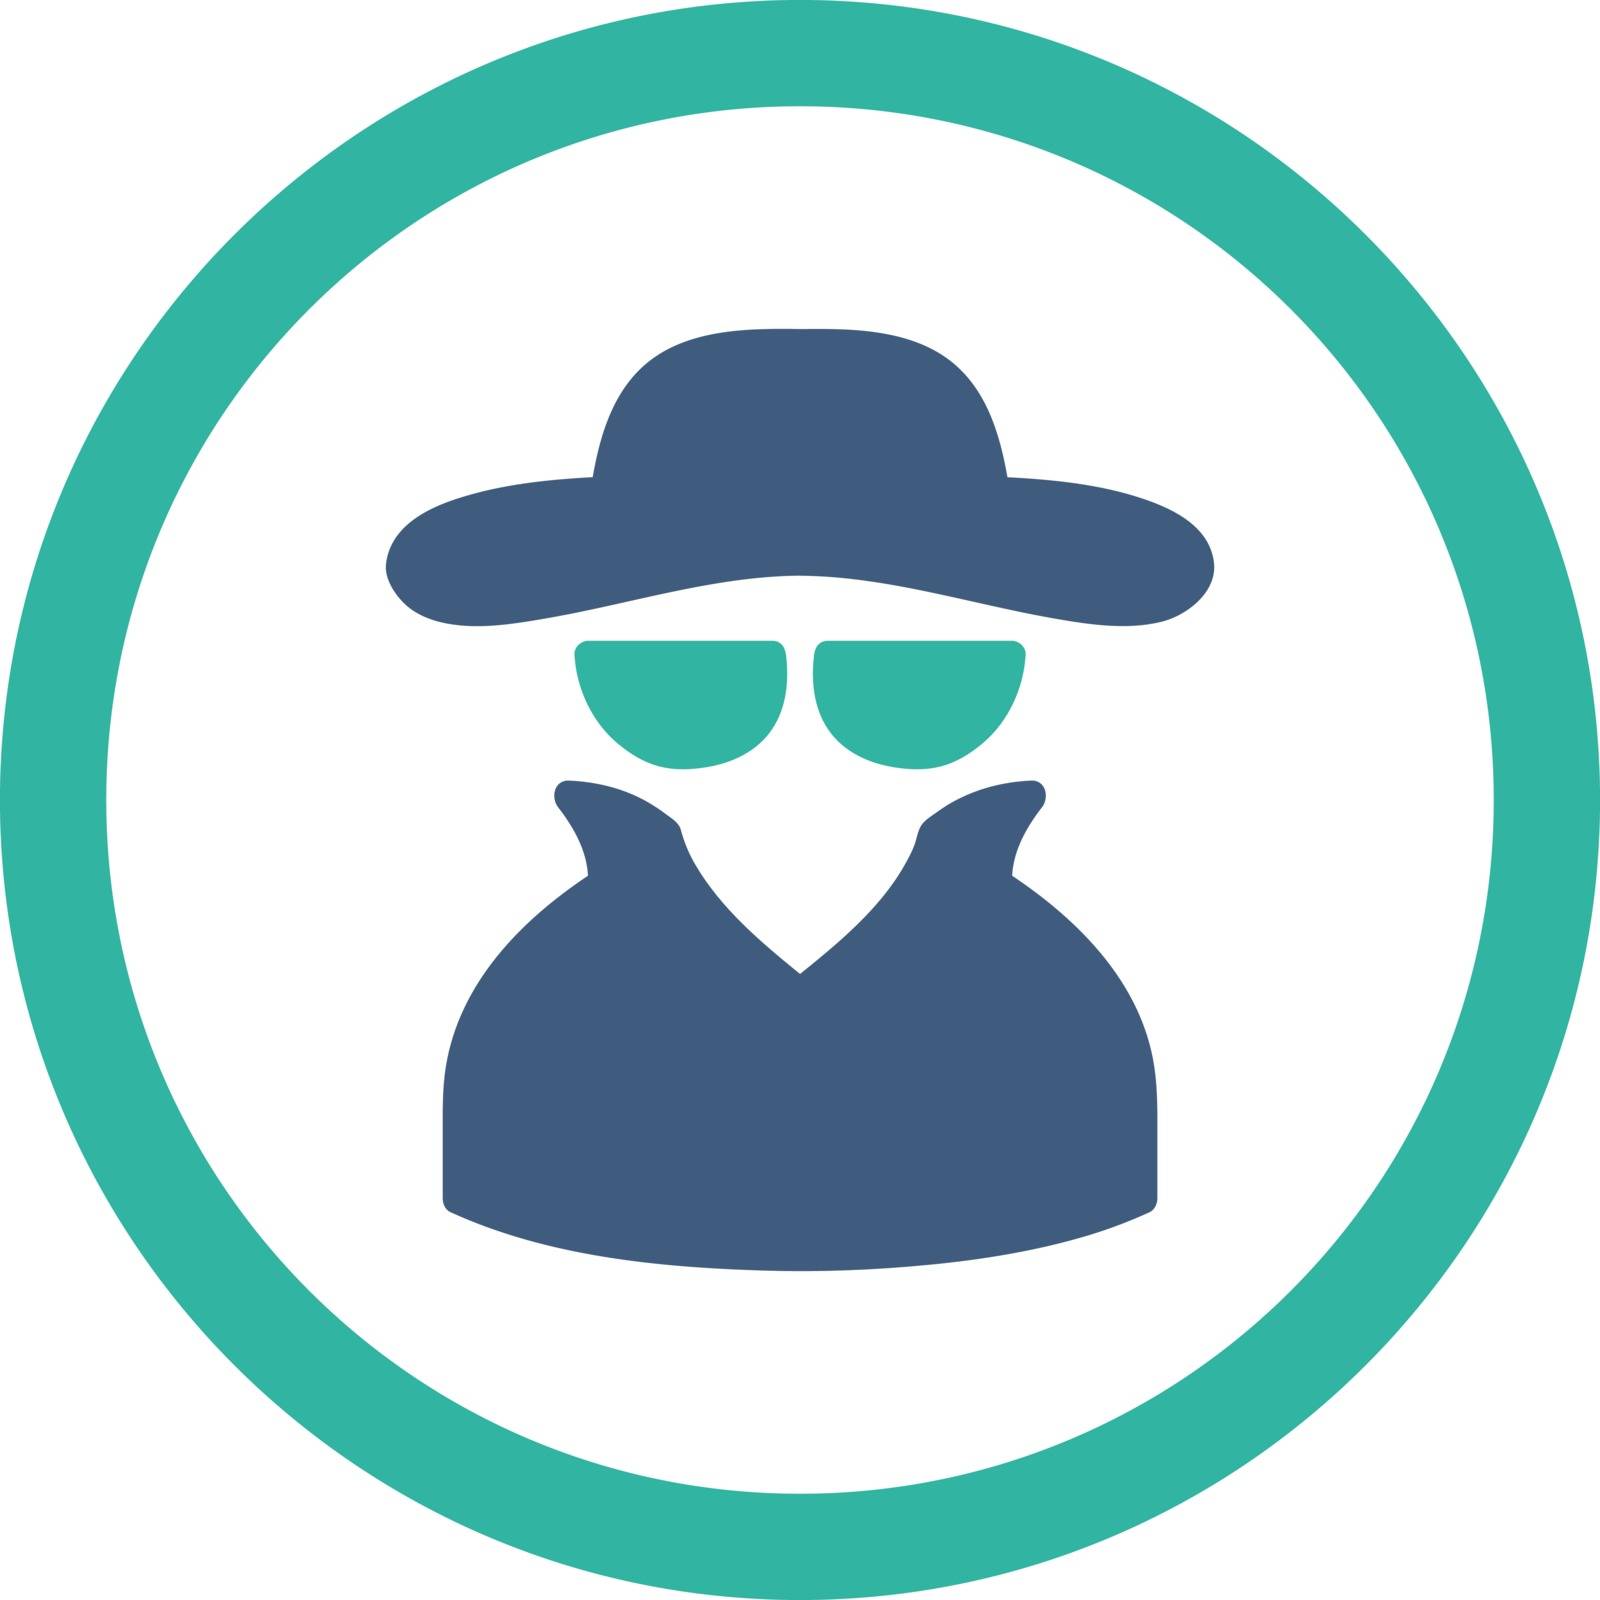 Spy vector icon. This rounded flat symbol is drawn with cobalt and cyan colors on a white background.